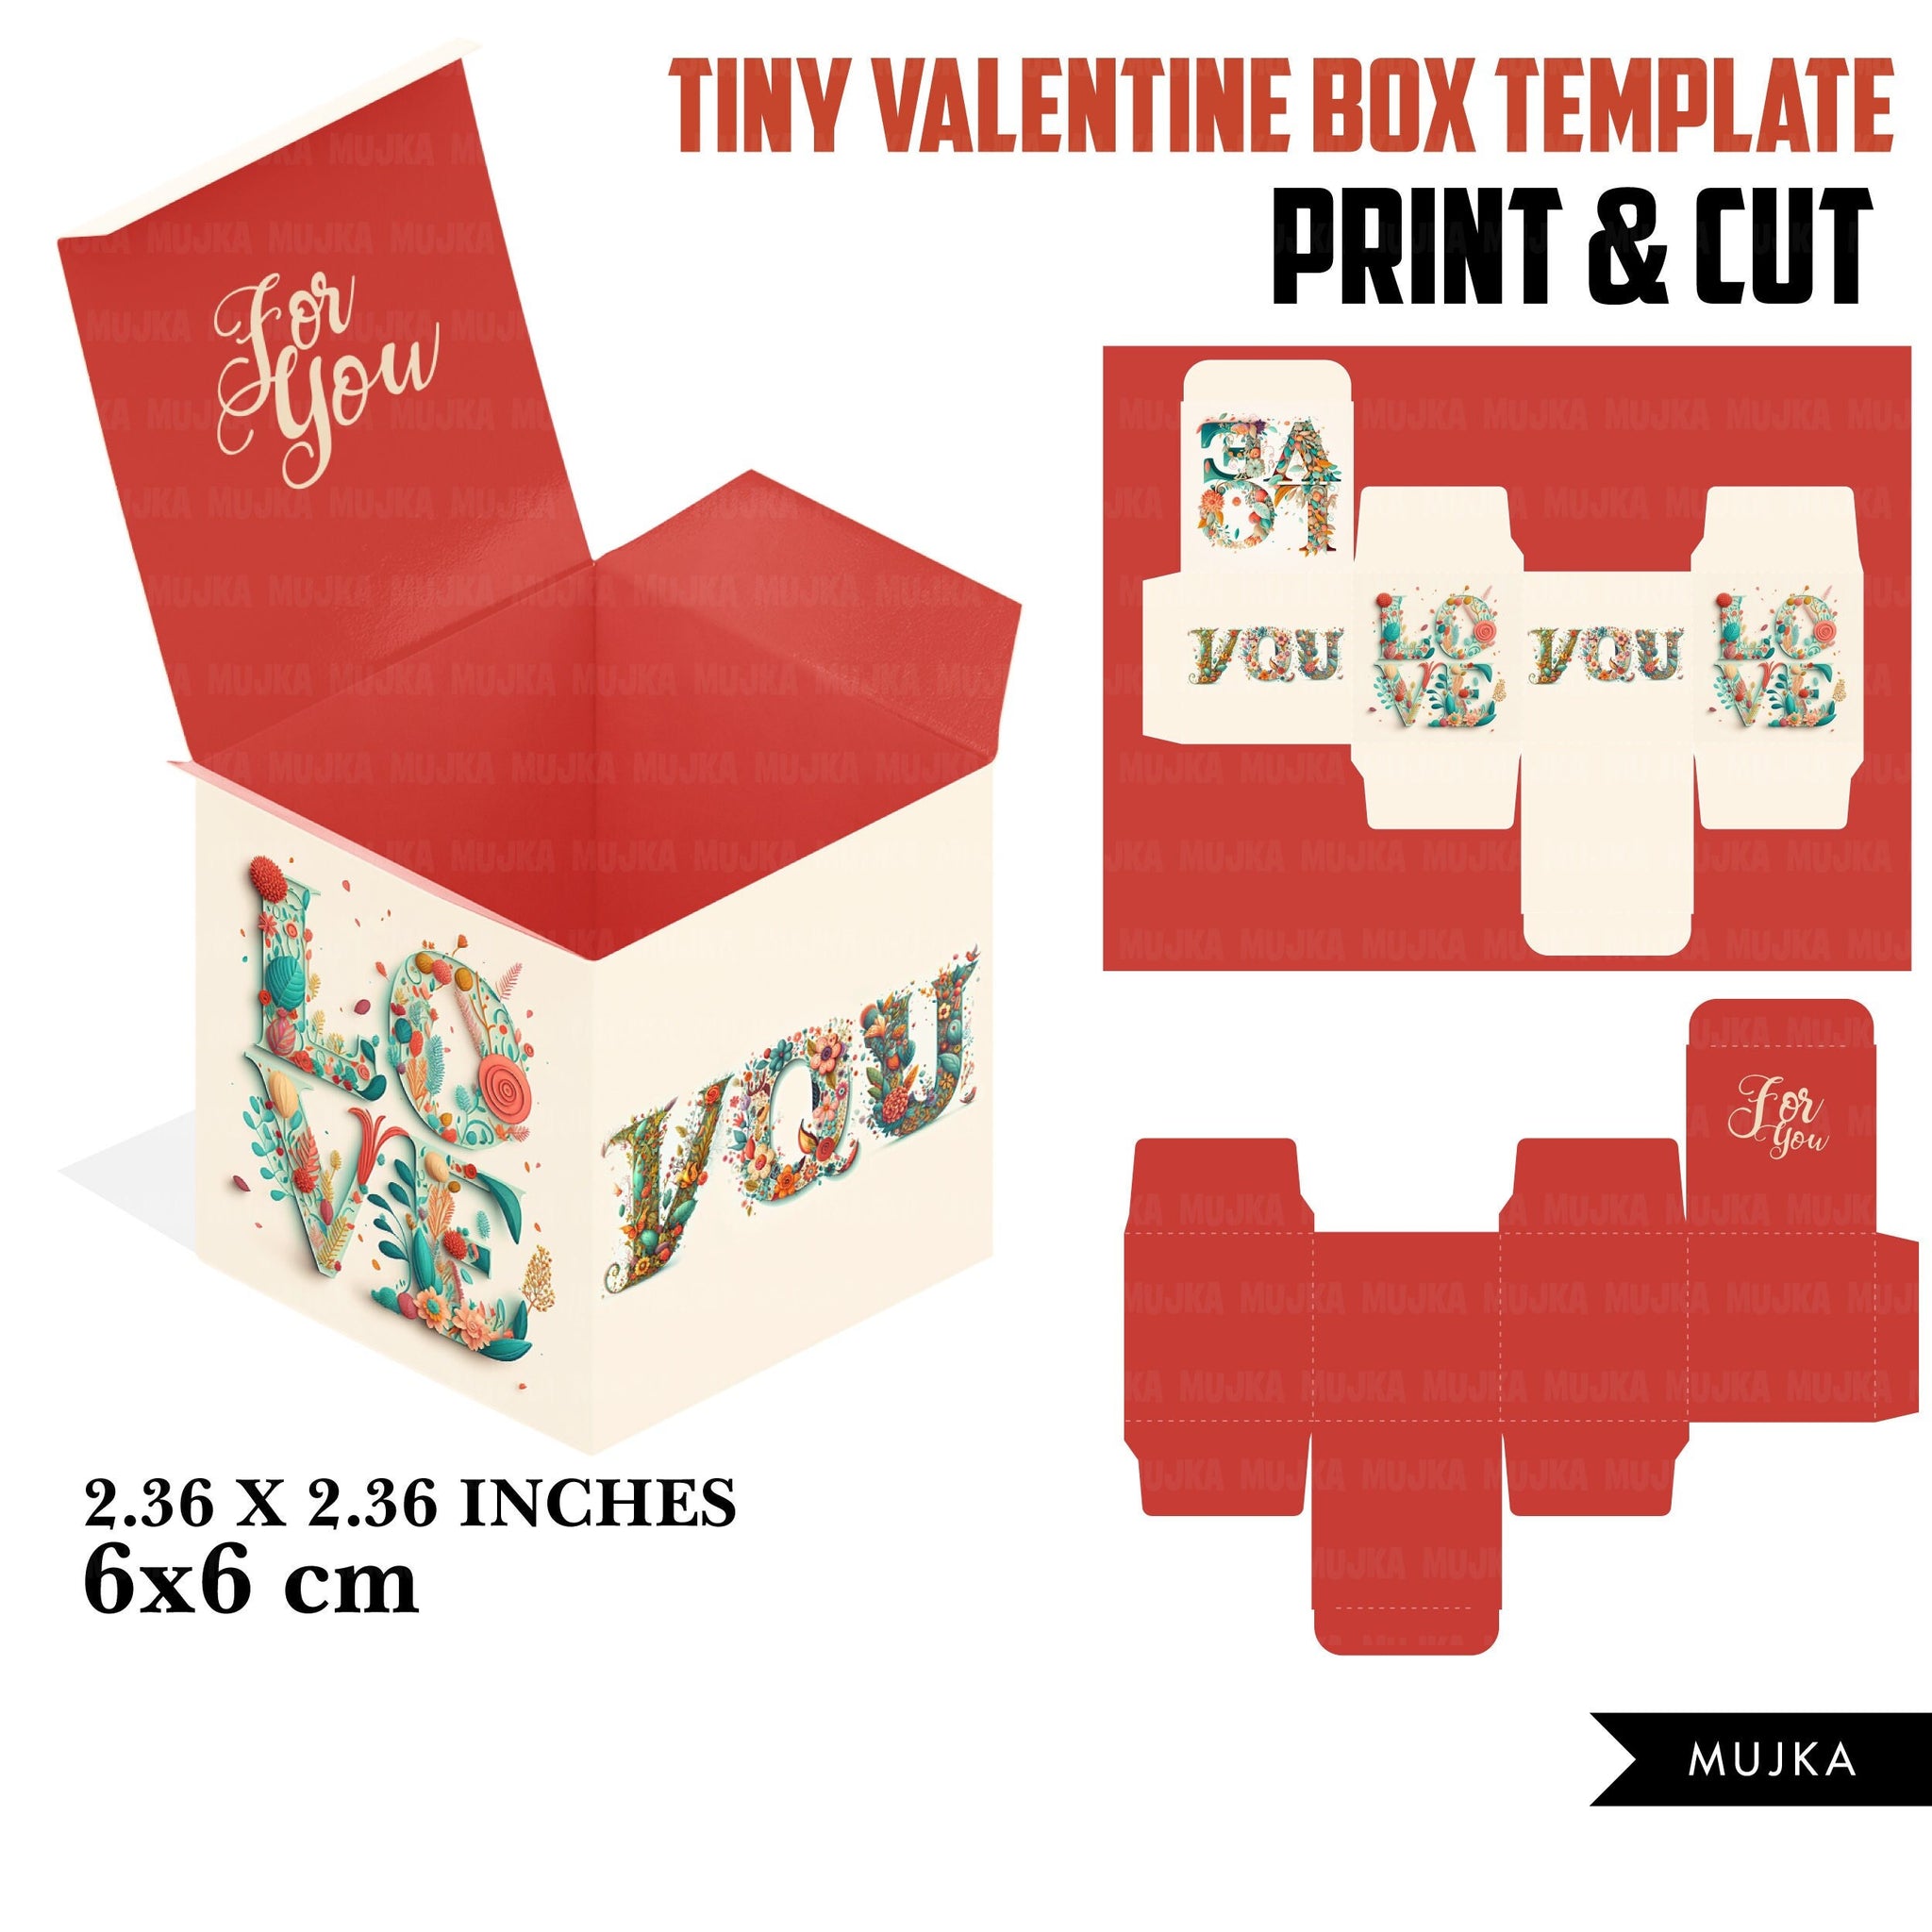 Valentine's Day gift box template, love gift box, gift box for her, printable gift box template, love png, gifts for her, print and cut box